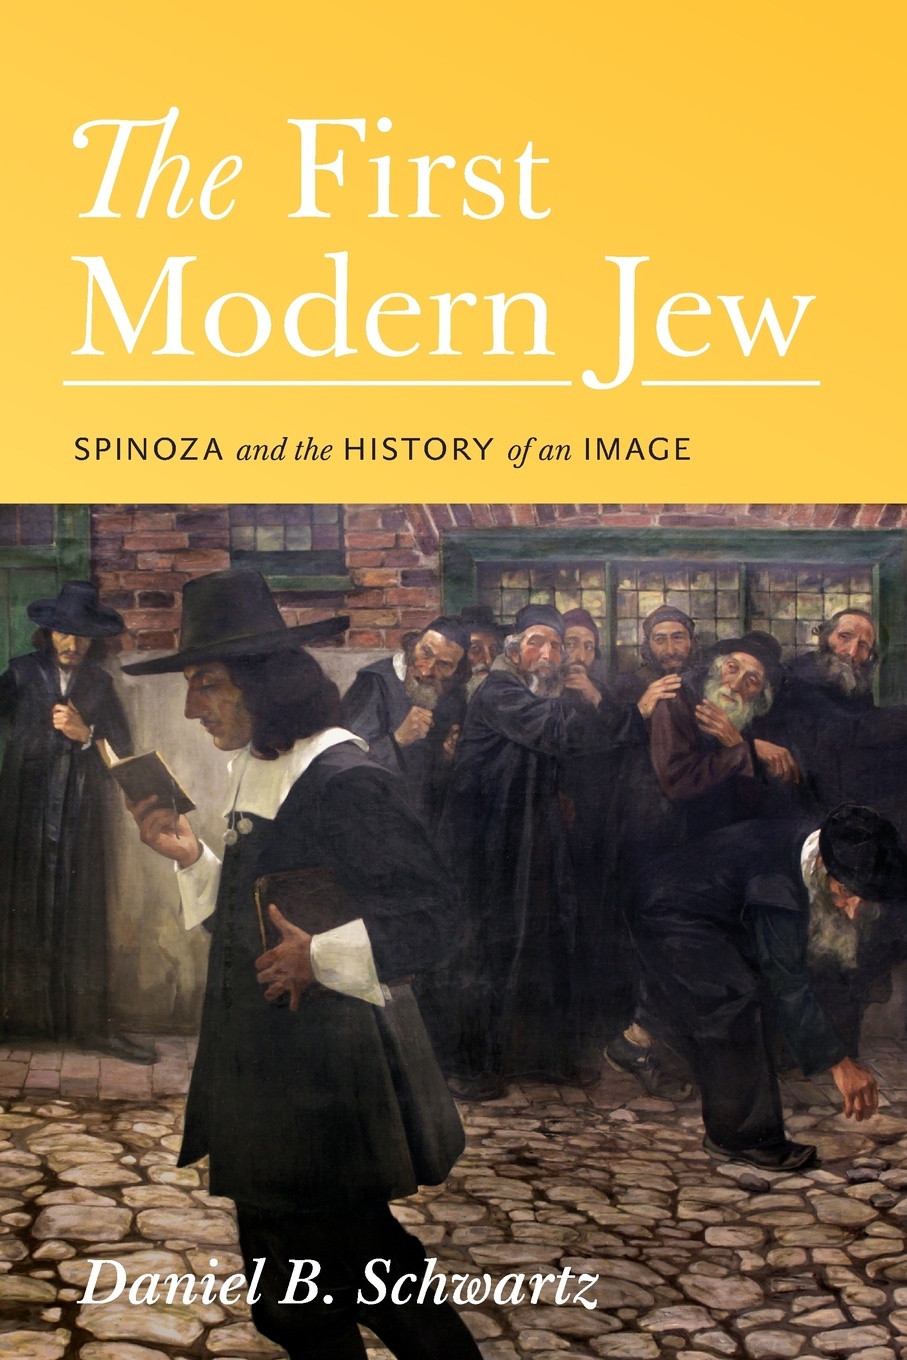 The First Modern Jew. Spinoza and the History of an Image